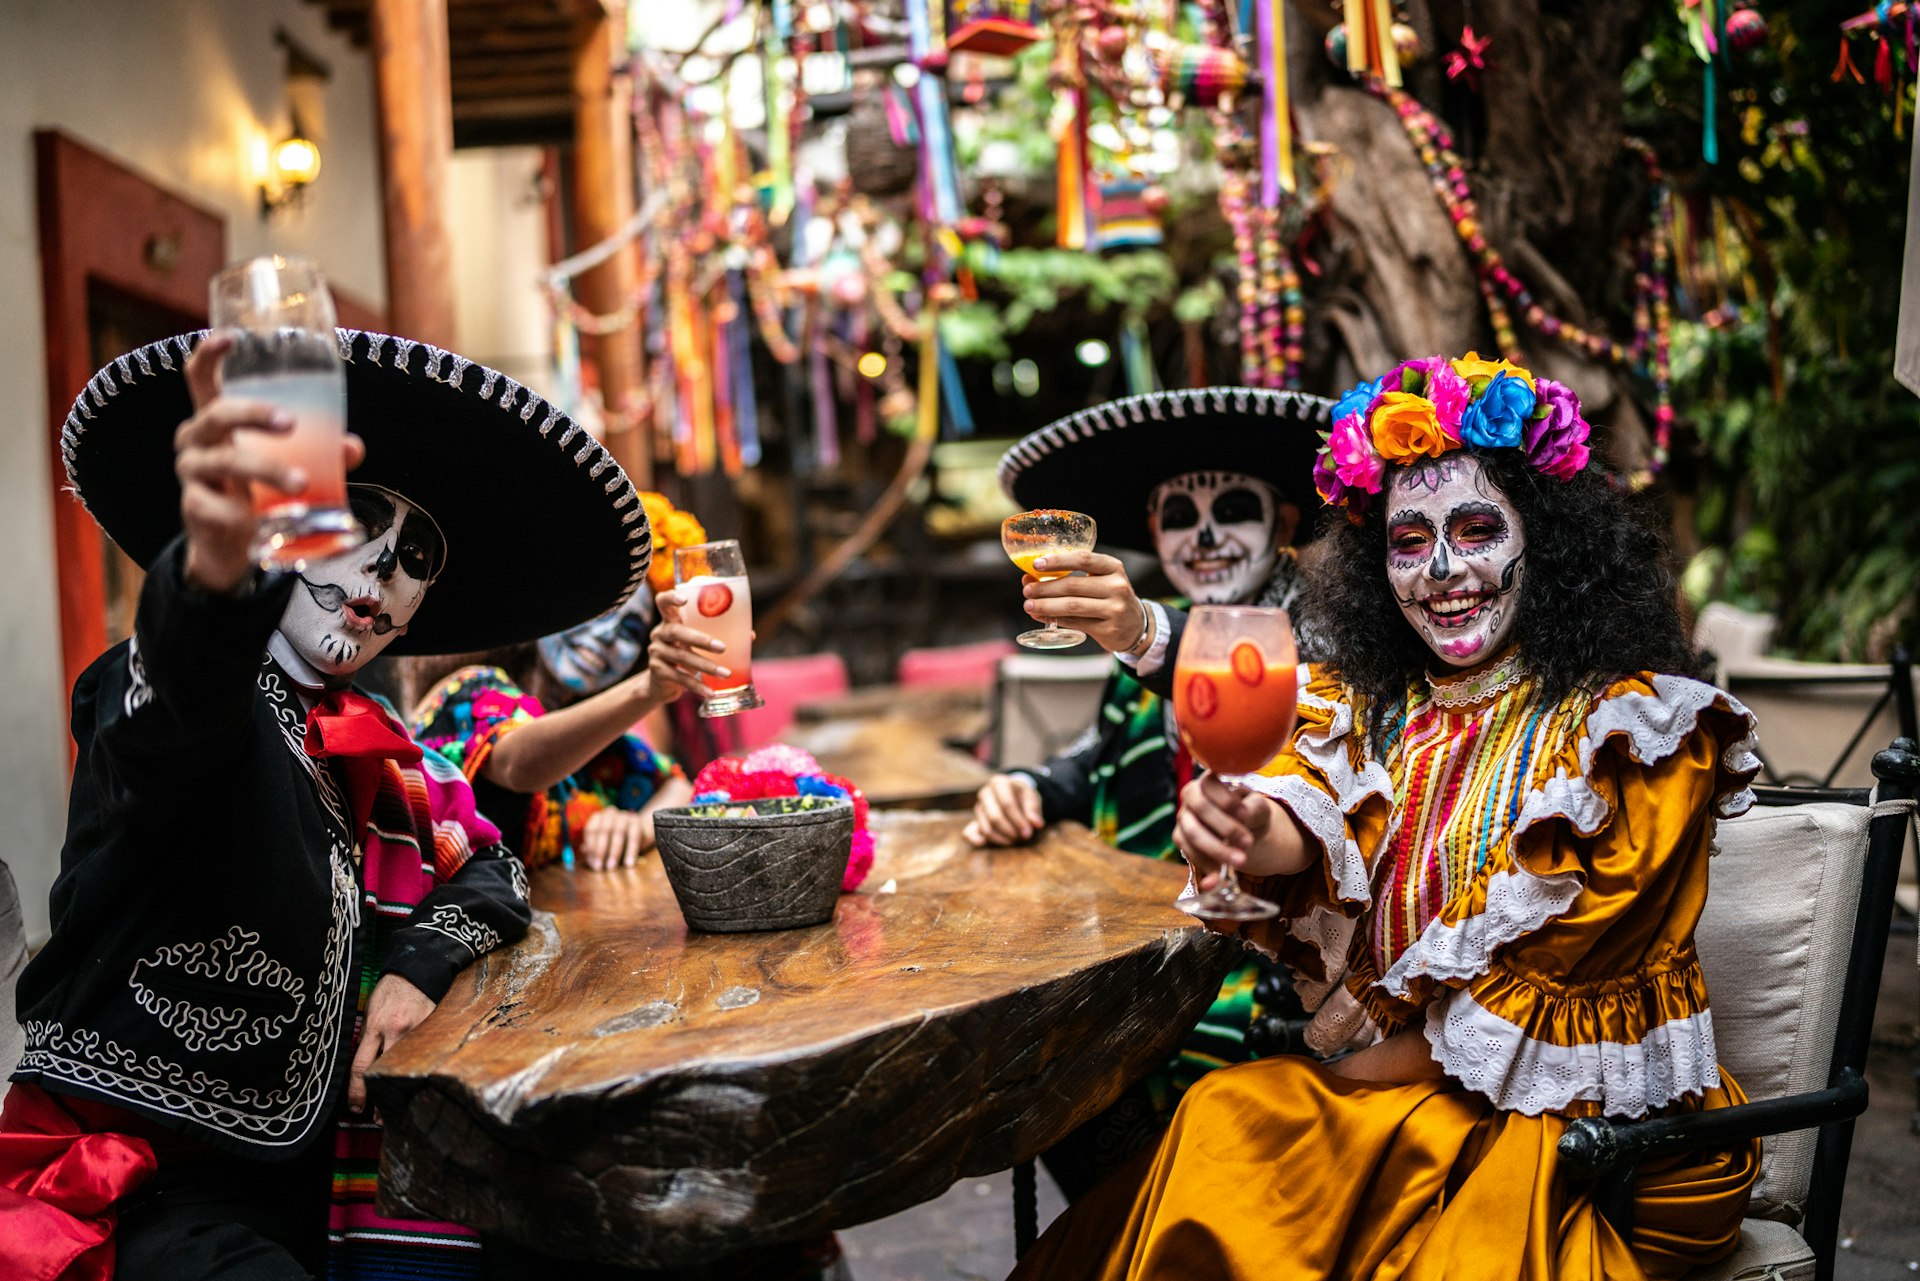 A group of friends in full make up celebrating the Day of the Dead at a bar in Mexico